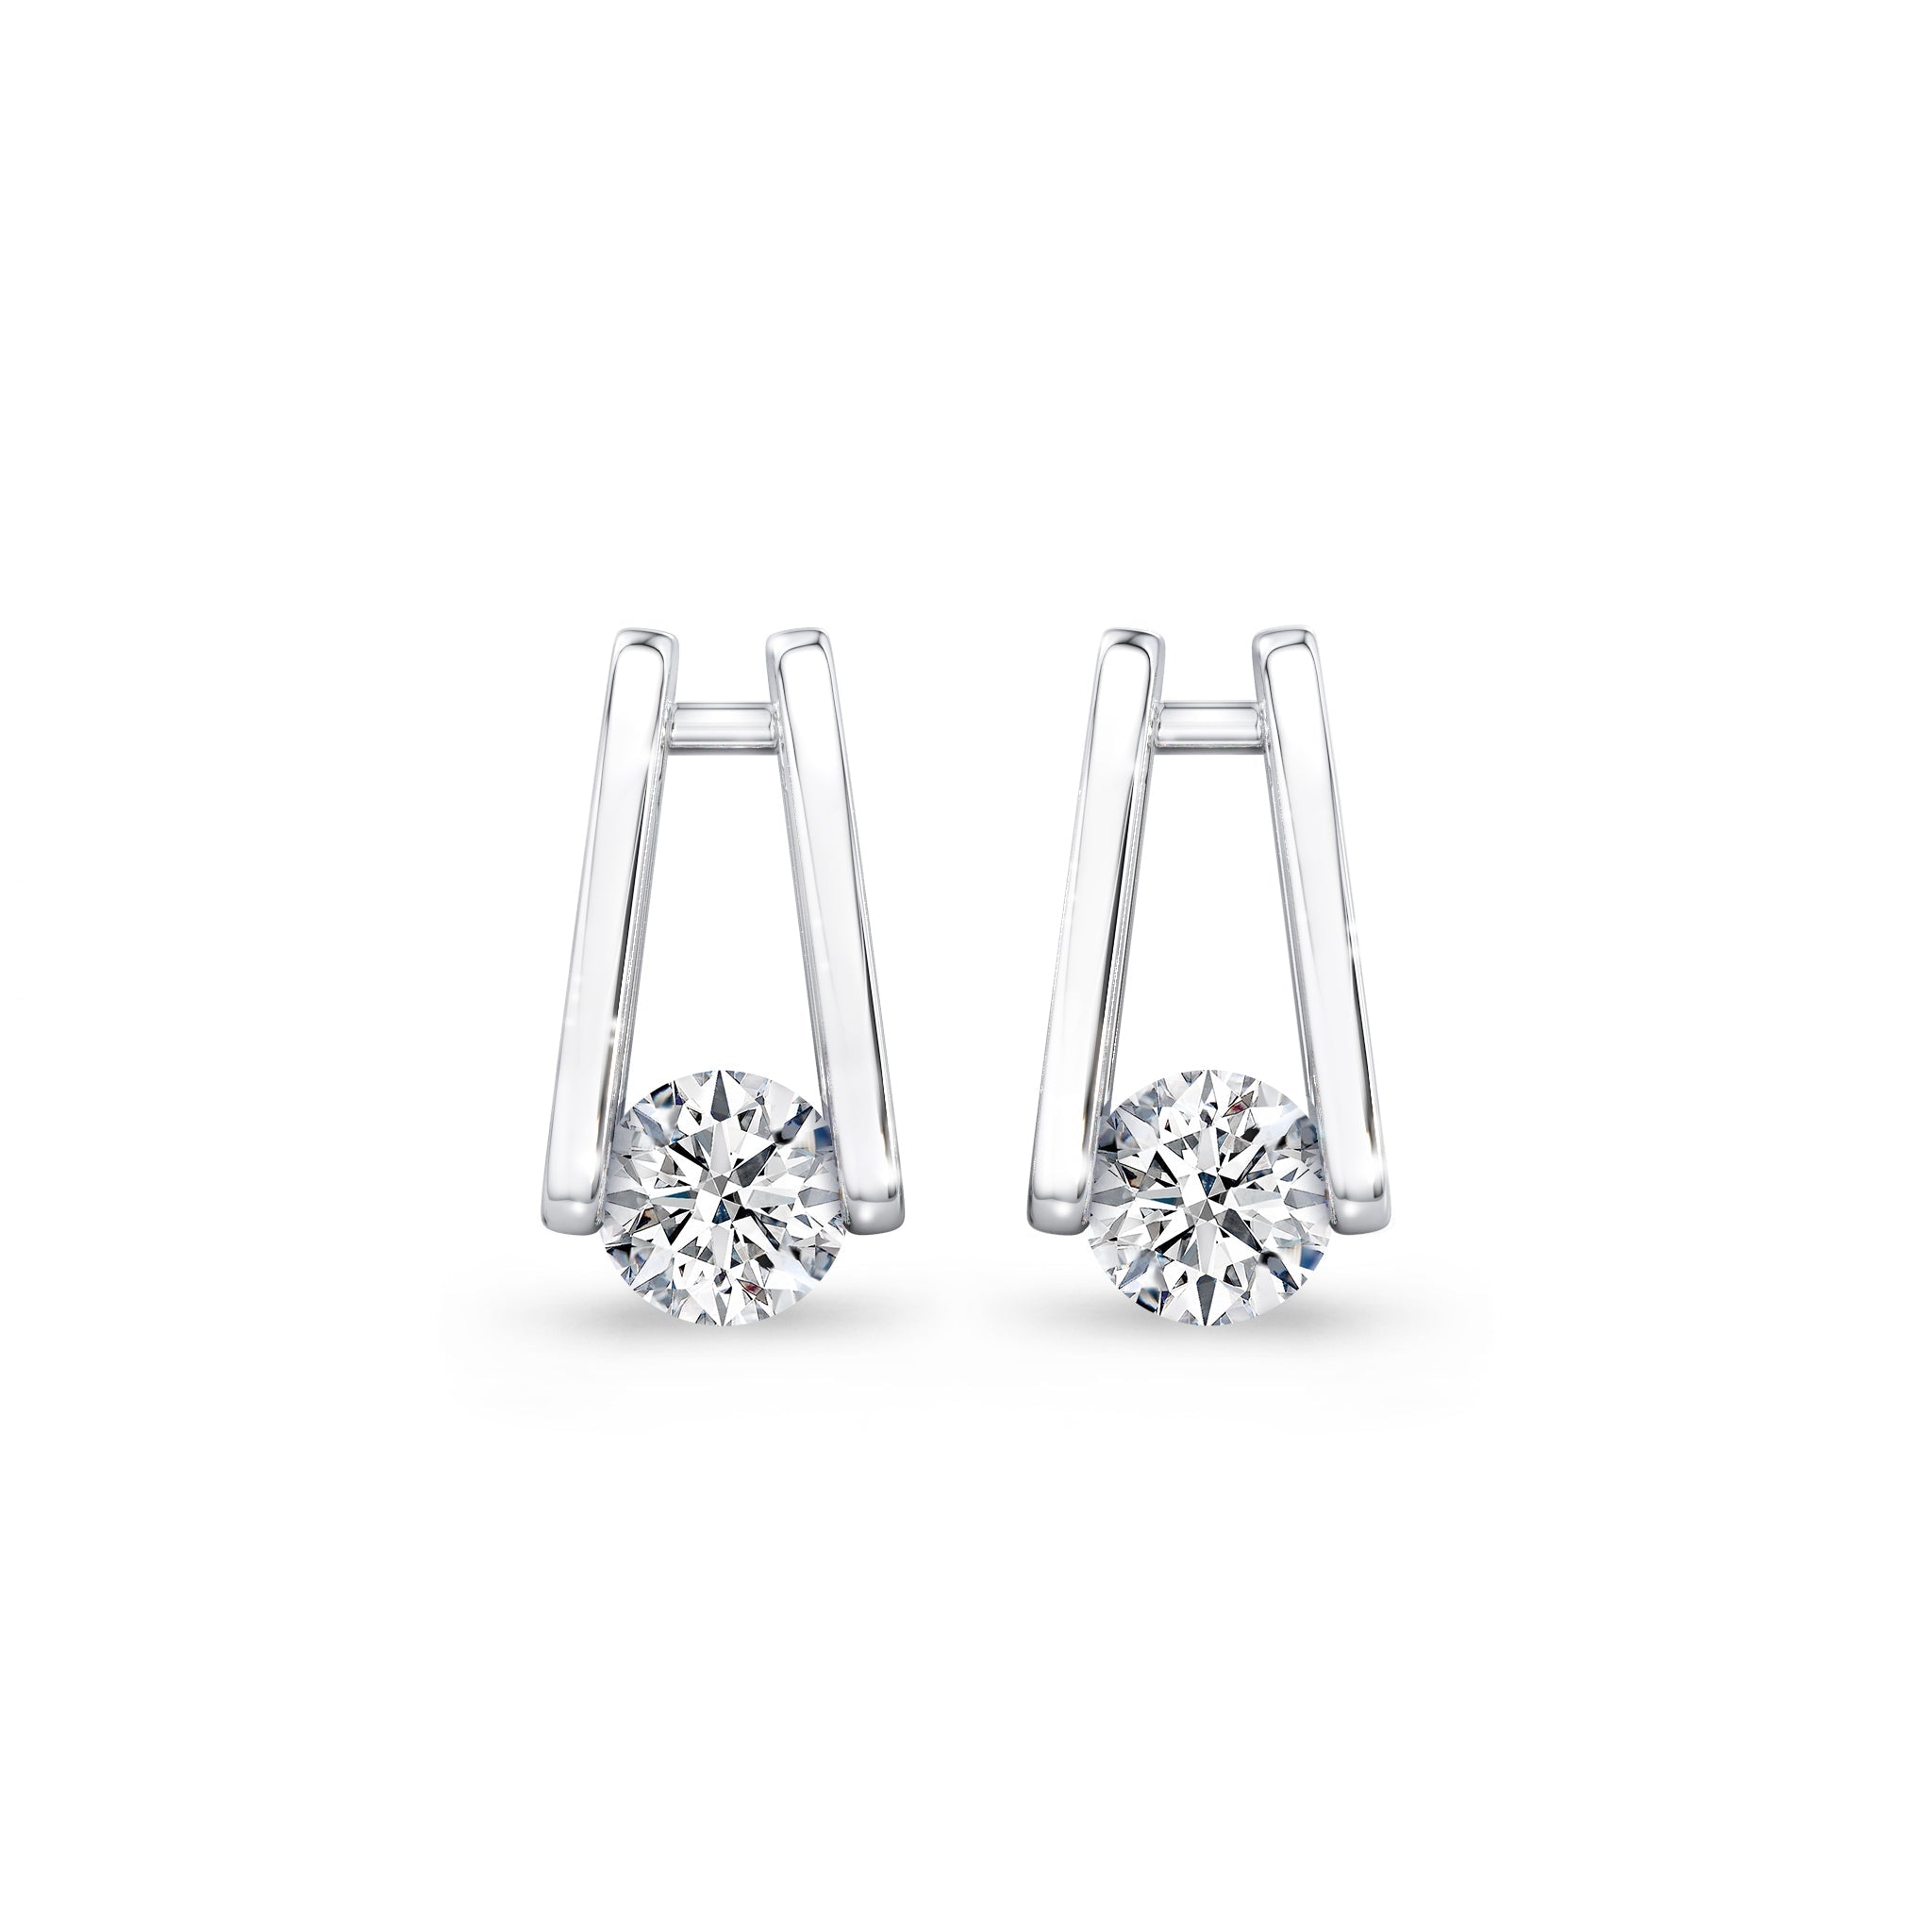 Millennium Classic Diamond Stud Earrings 0.60 Carat in 18K White Gold Front View